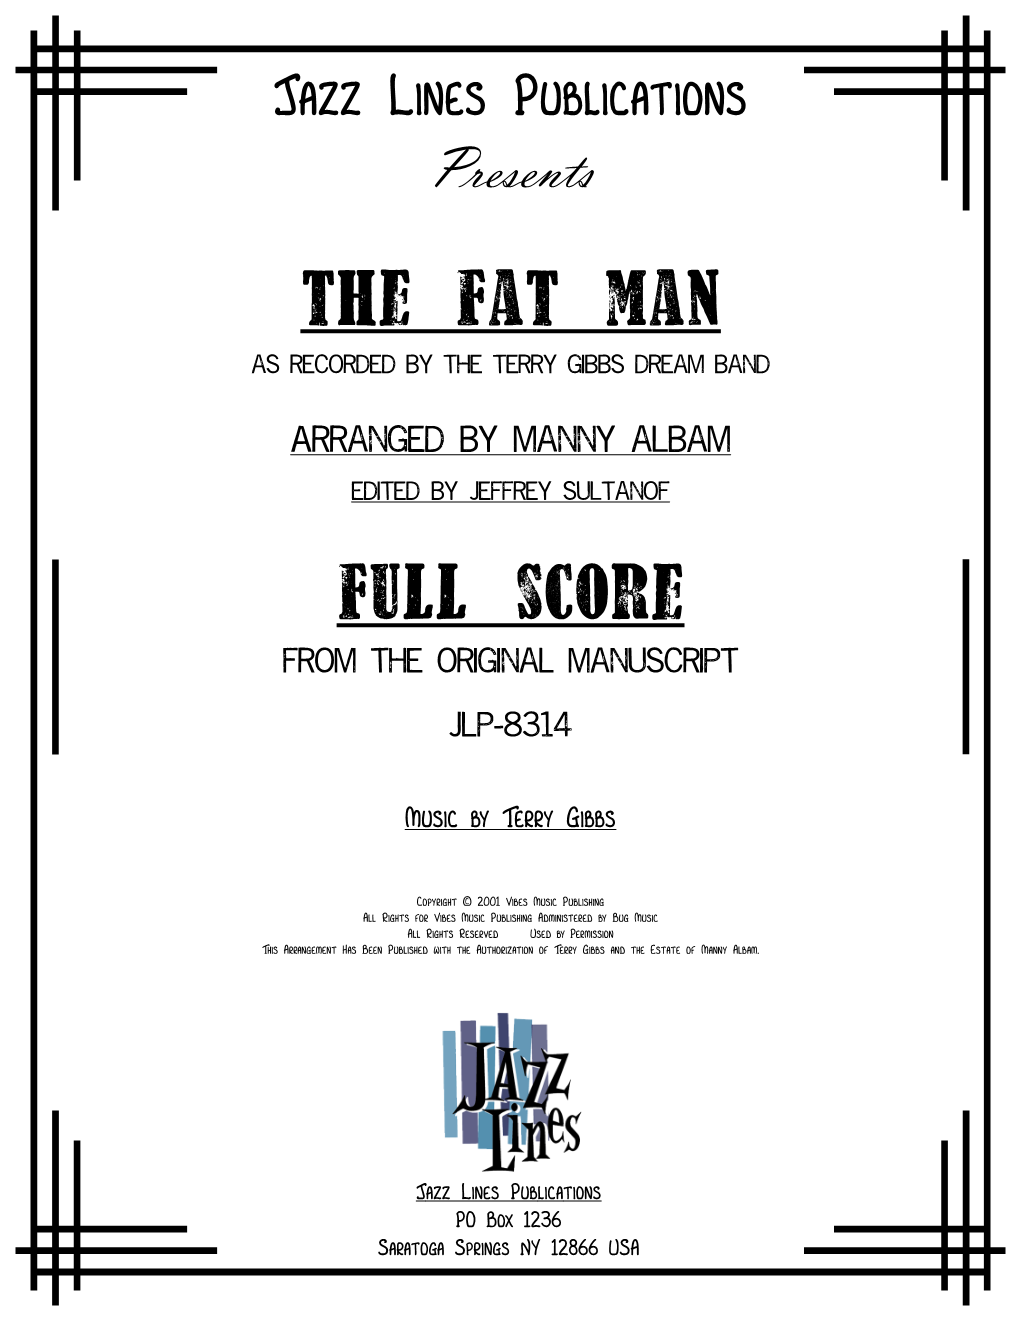 The Fat Man As Recorded by the Terry Gibbs Dream Band